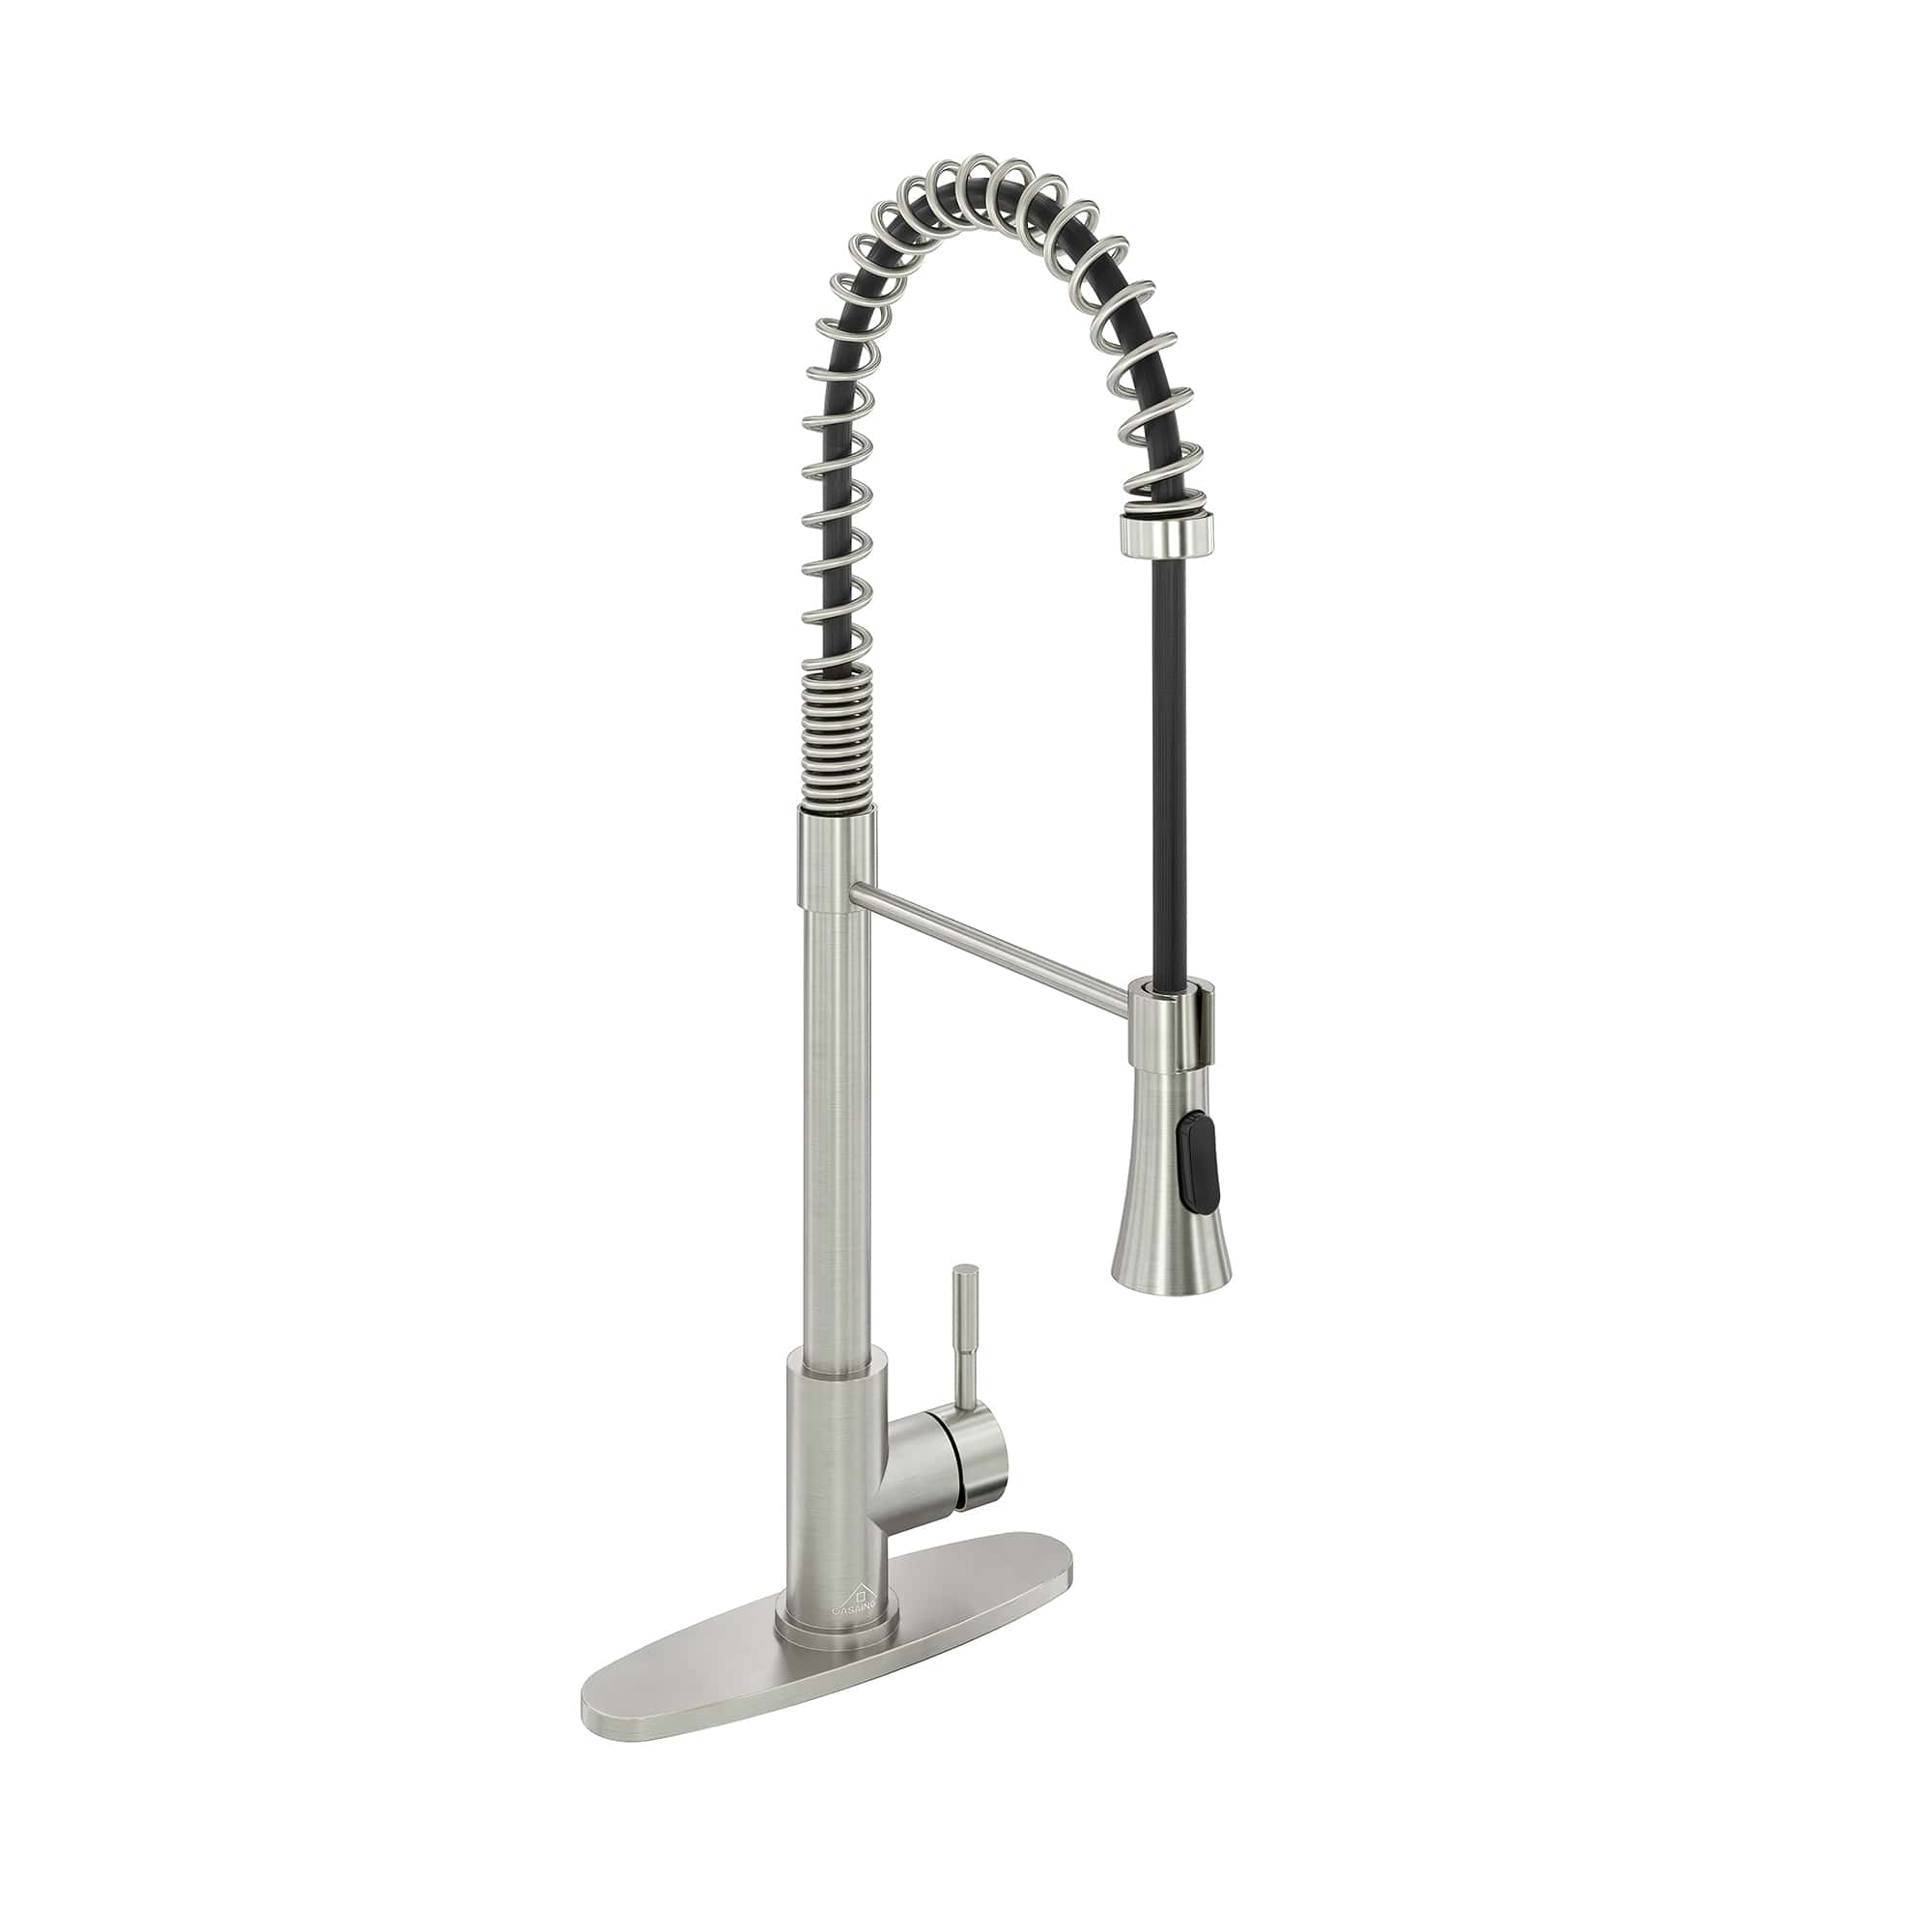 CASAINC 1.8GPM Spring Kitchen Faucet in Brushed Nickel and More